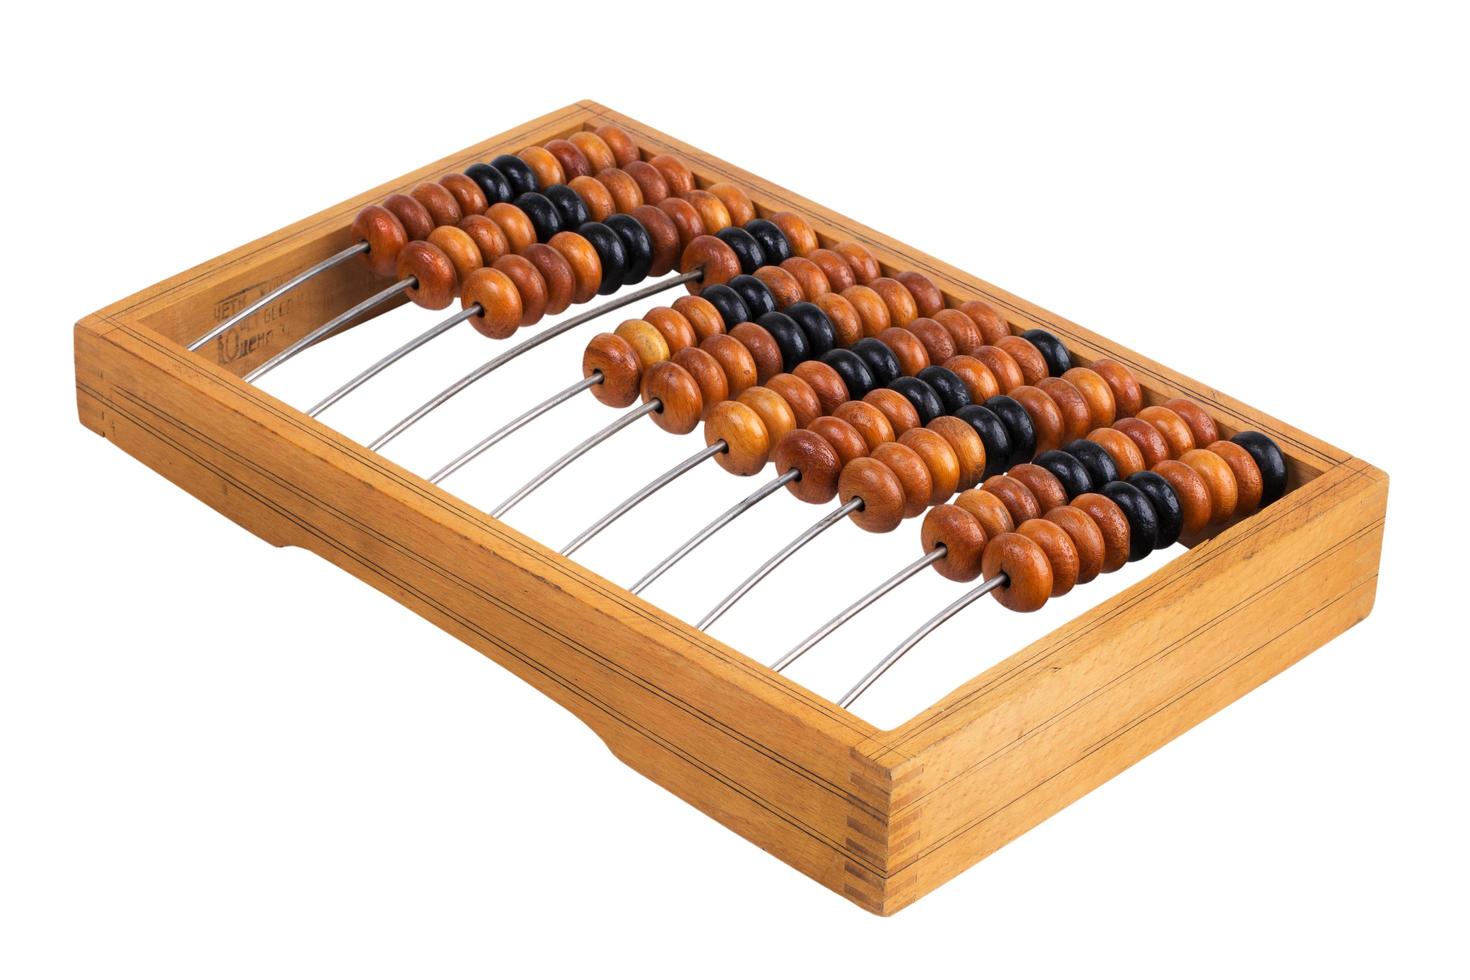 Old abacus lay on a white background photo